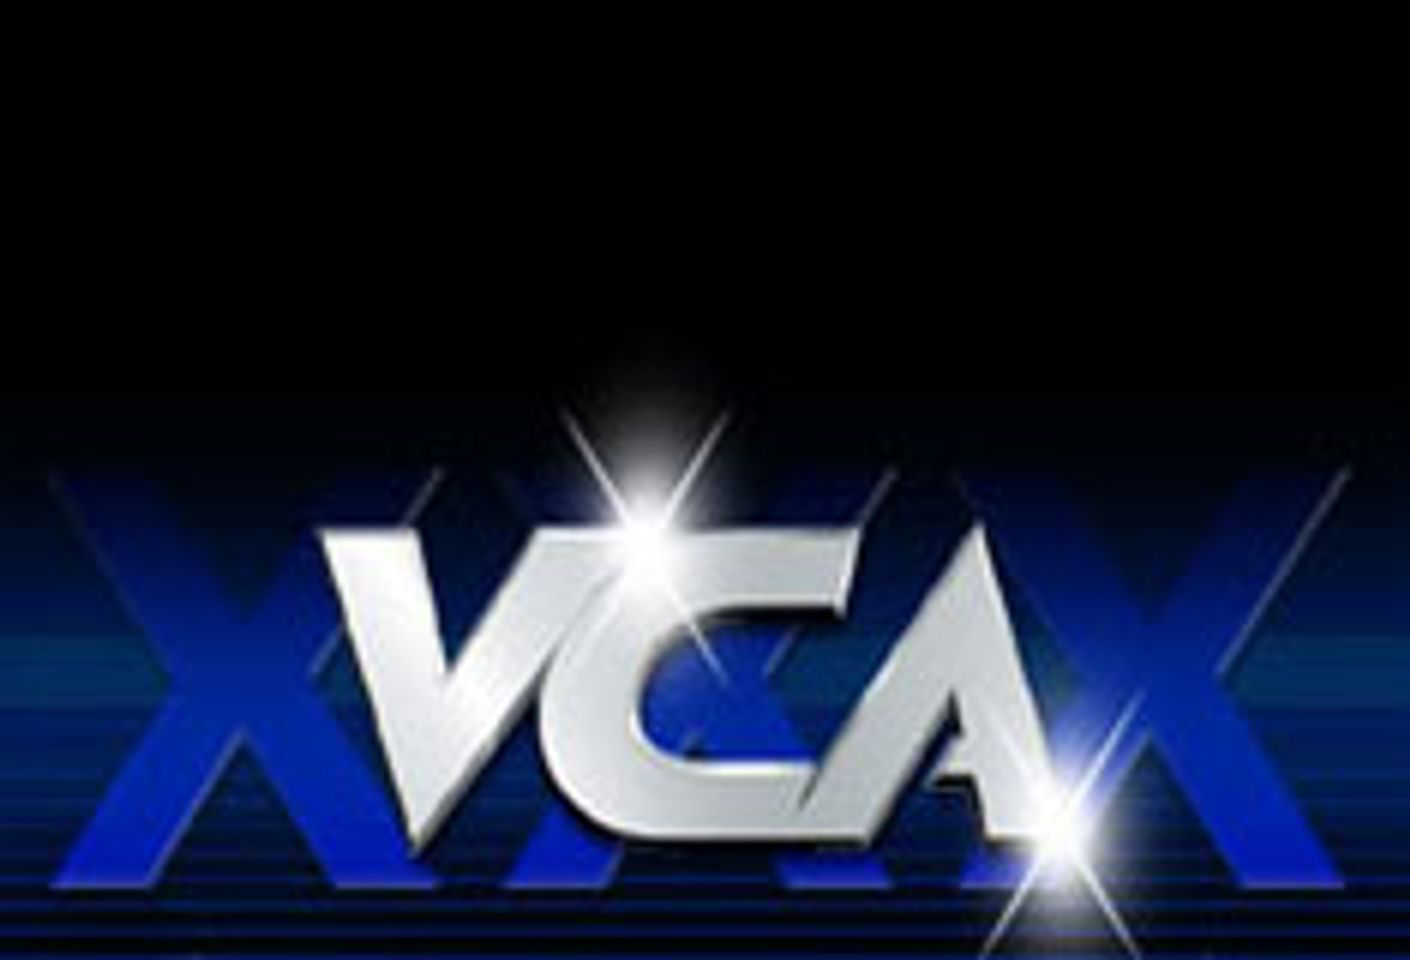 VCAXXX Doubles Payouts Through March